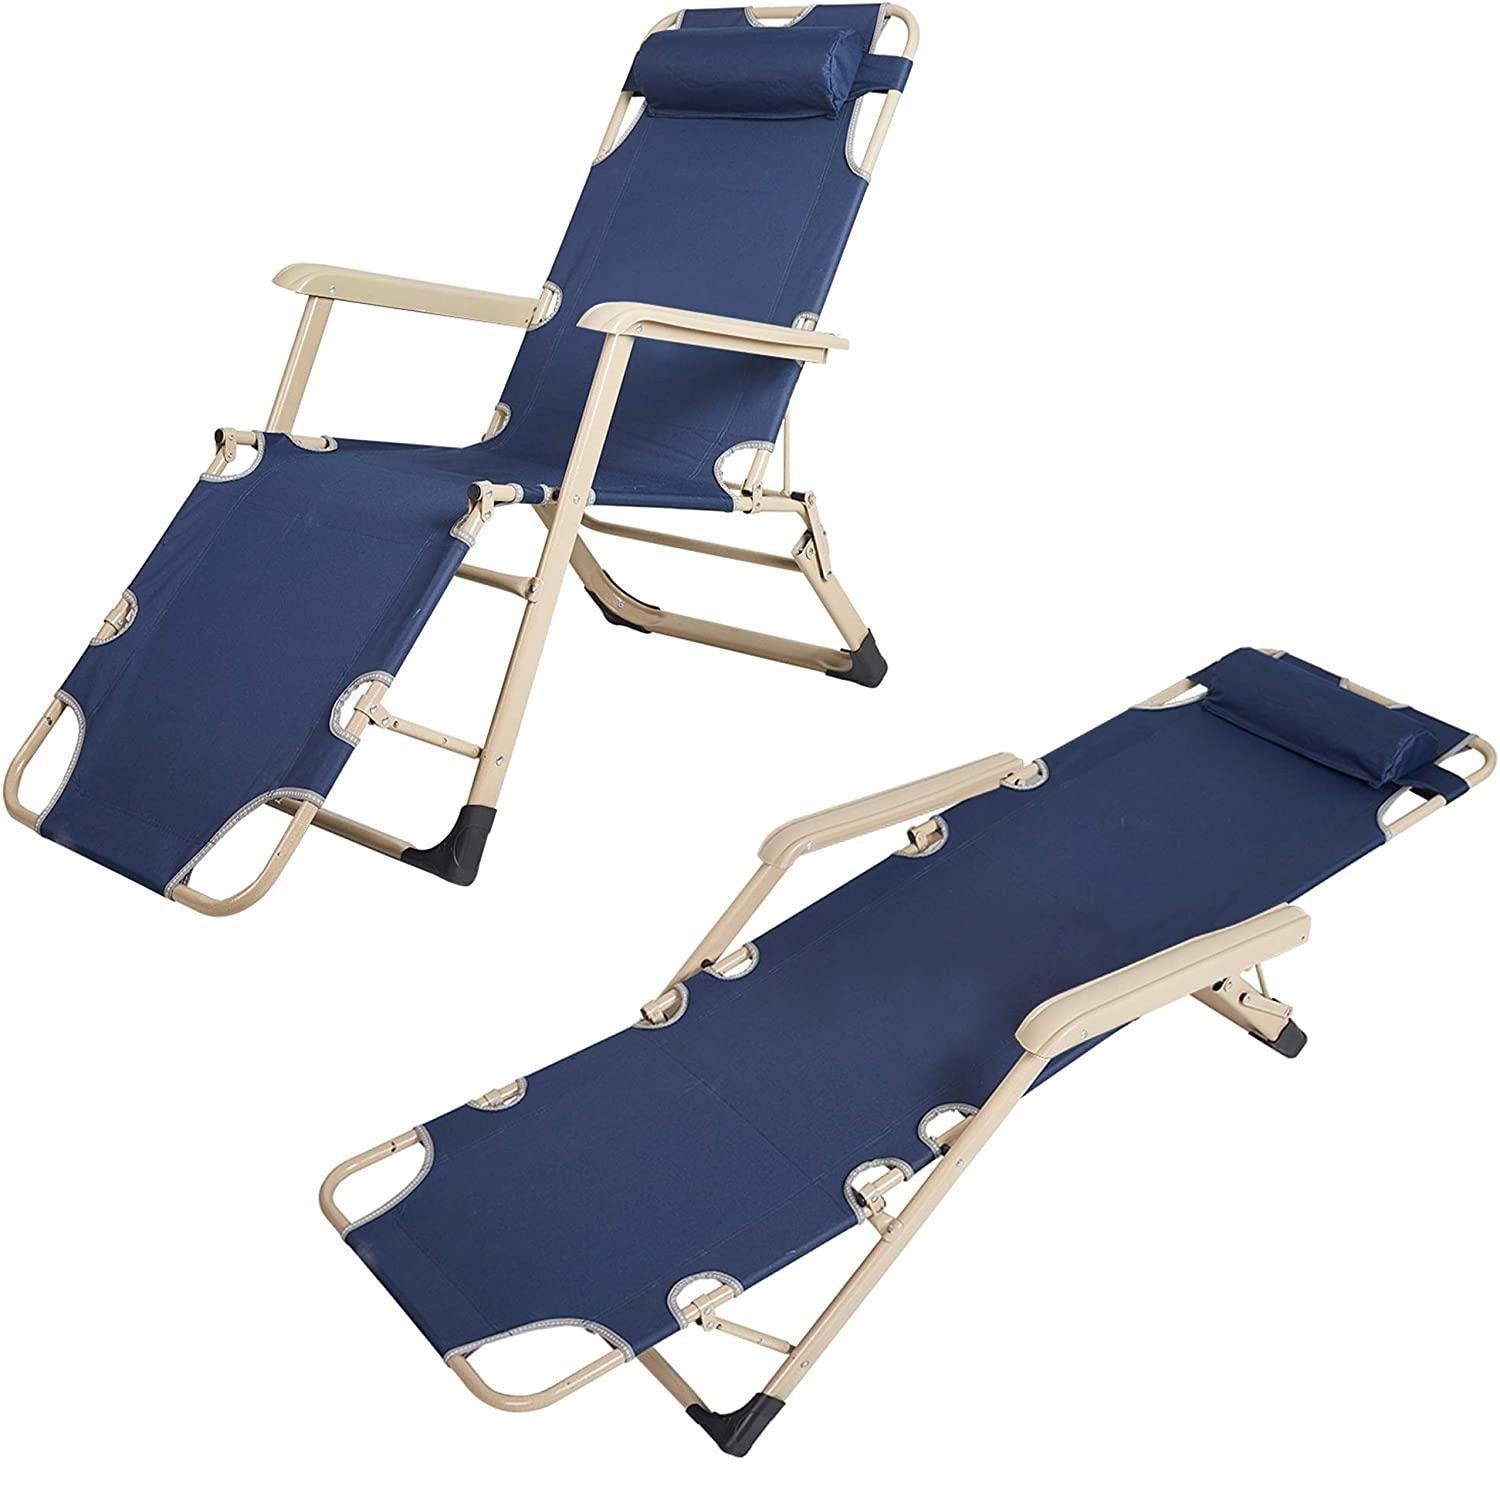 Set of 2 Outdoor Reclining Lawn Chairs Adjustable Folding Patio Recliners with Pillow, Dark Blue